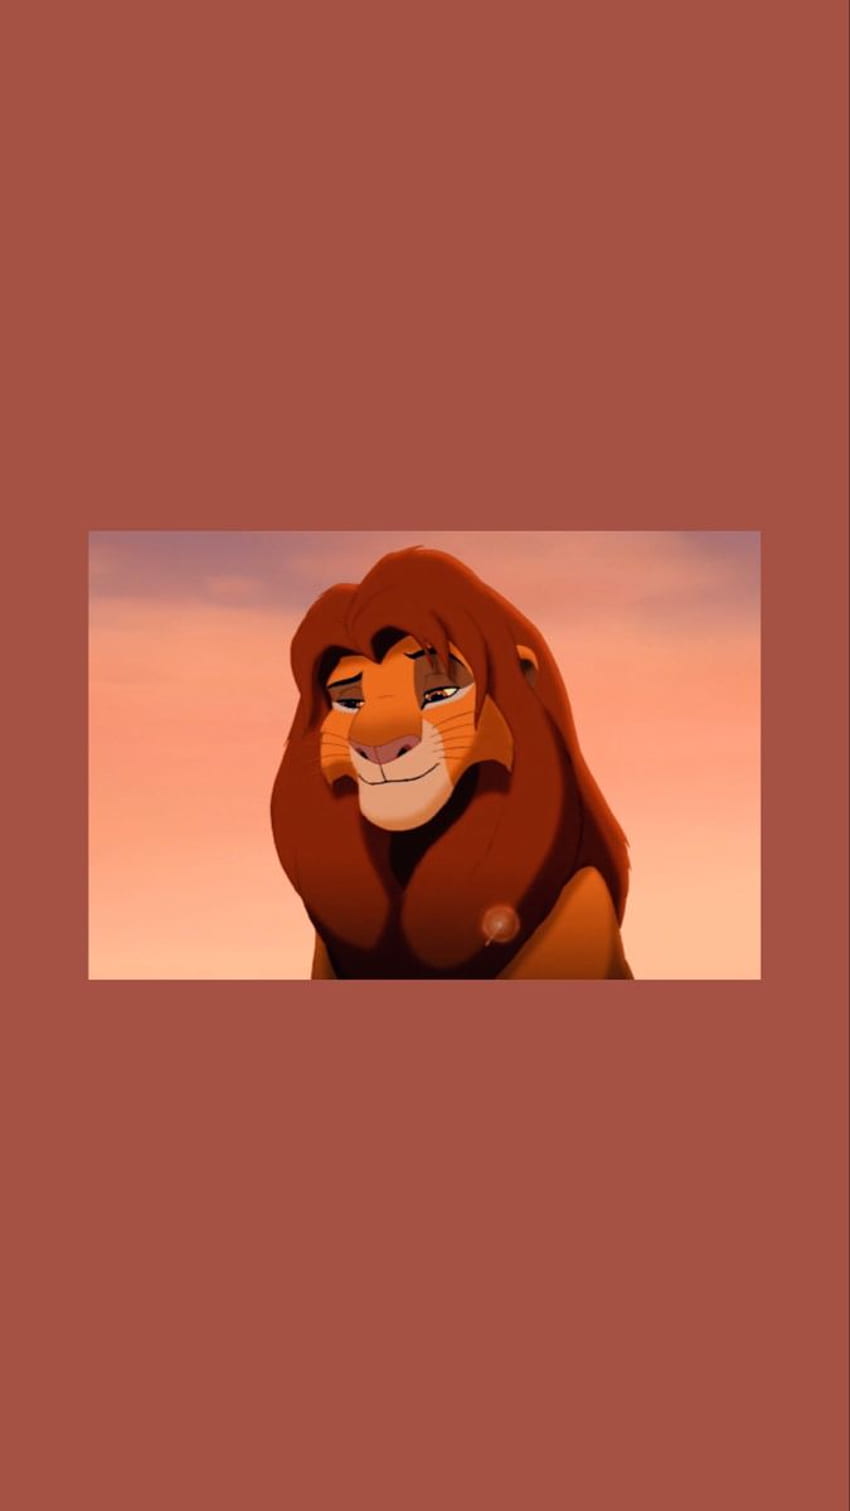 The lion king is looking at you - The Lion King, lion